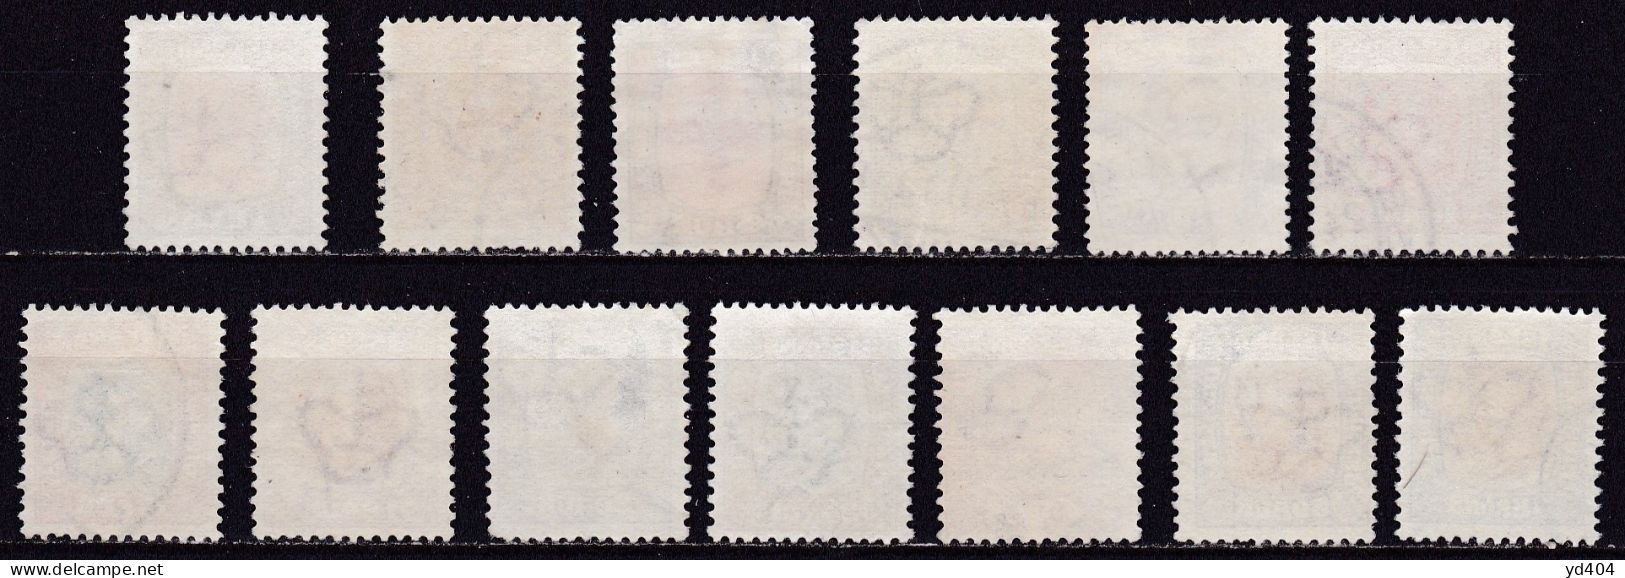 IS009A – ISLANDE – ICELAND – 1907/08 – KINGS CHRISTIAN IX & FREDERIK VII - SG # 81/93 USED 180 € - Used Stamps